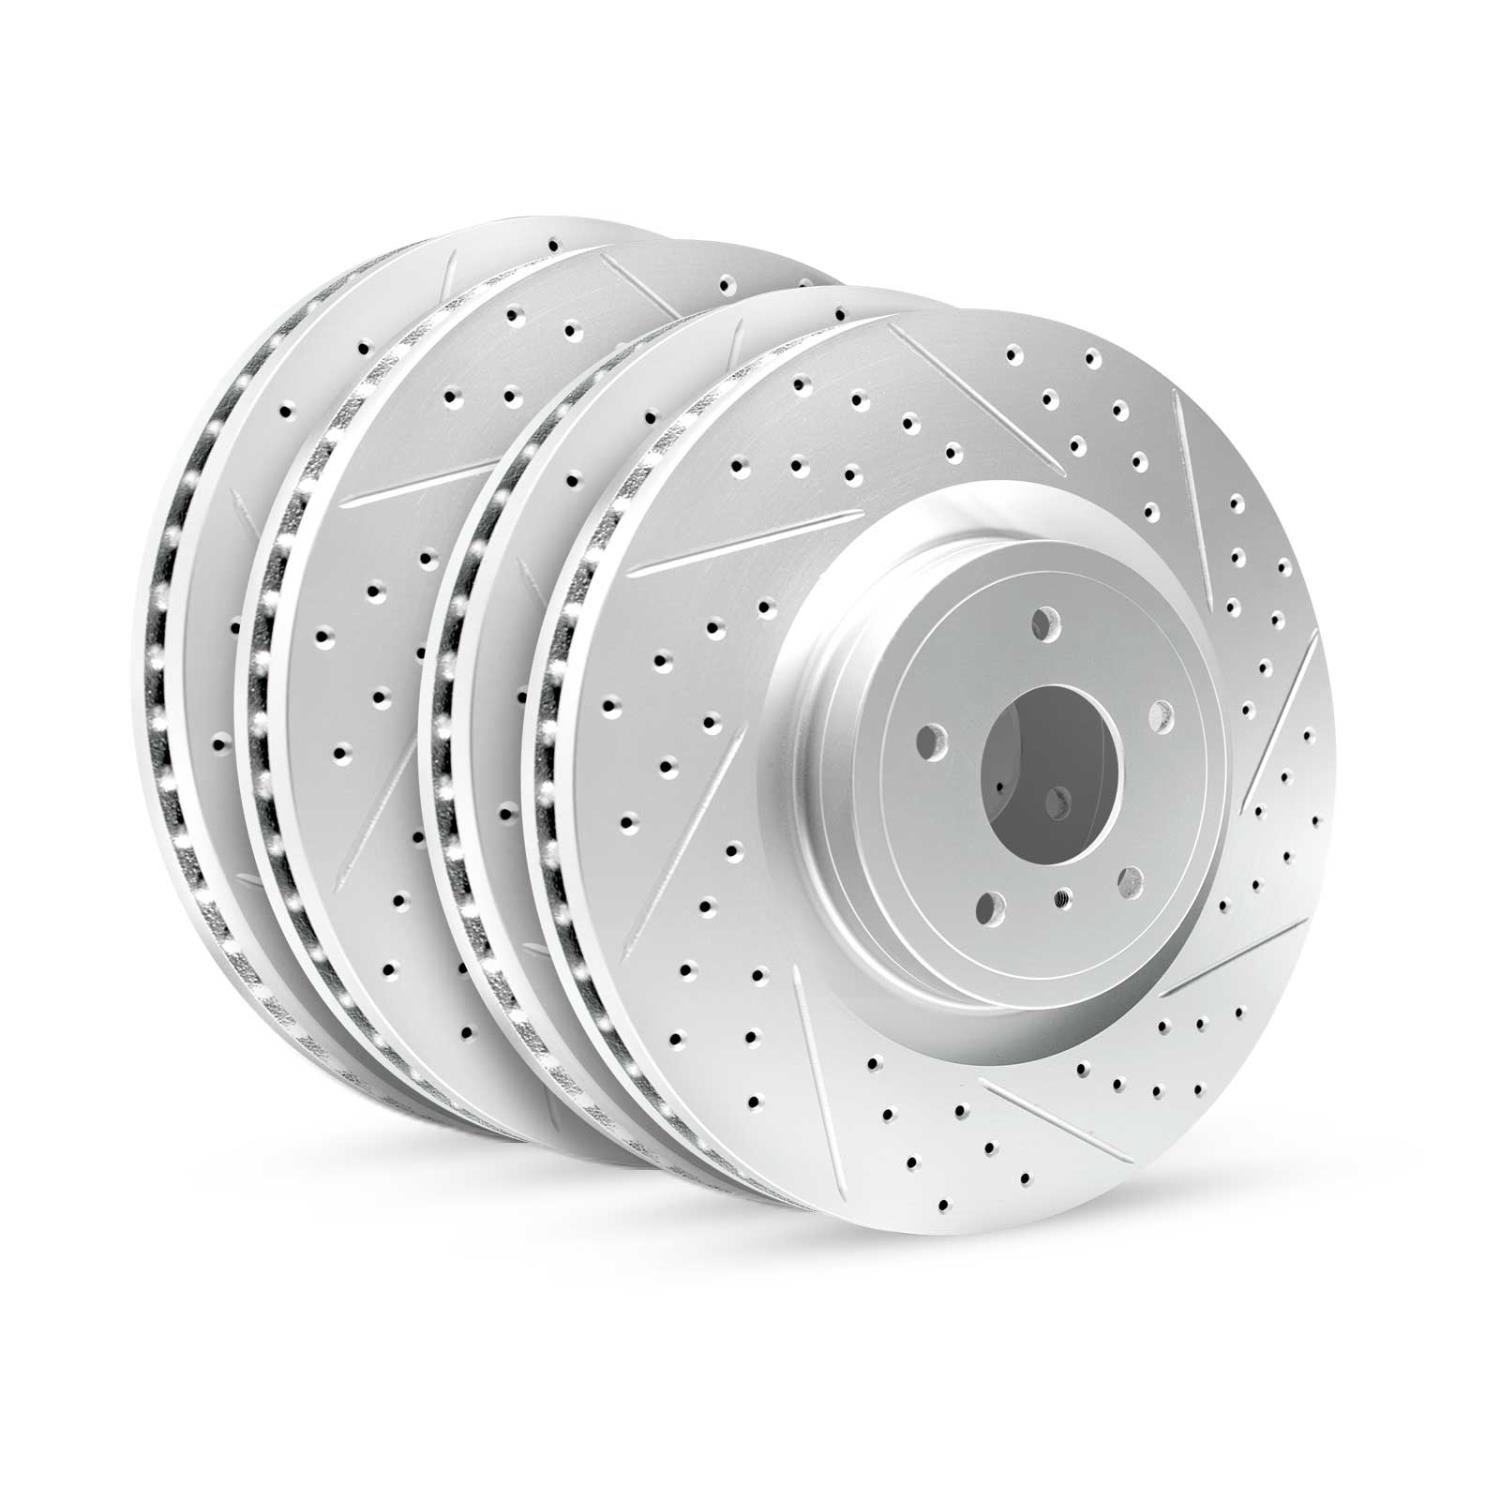 GEO-Carbon Drilled/Slotted Rotors, 1999-2004 Audi/Porsche/Volkswagen, Position: Front/Rear